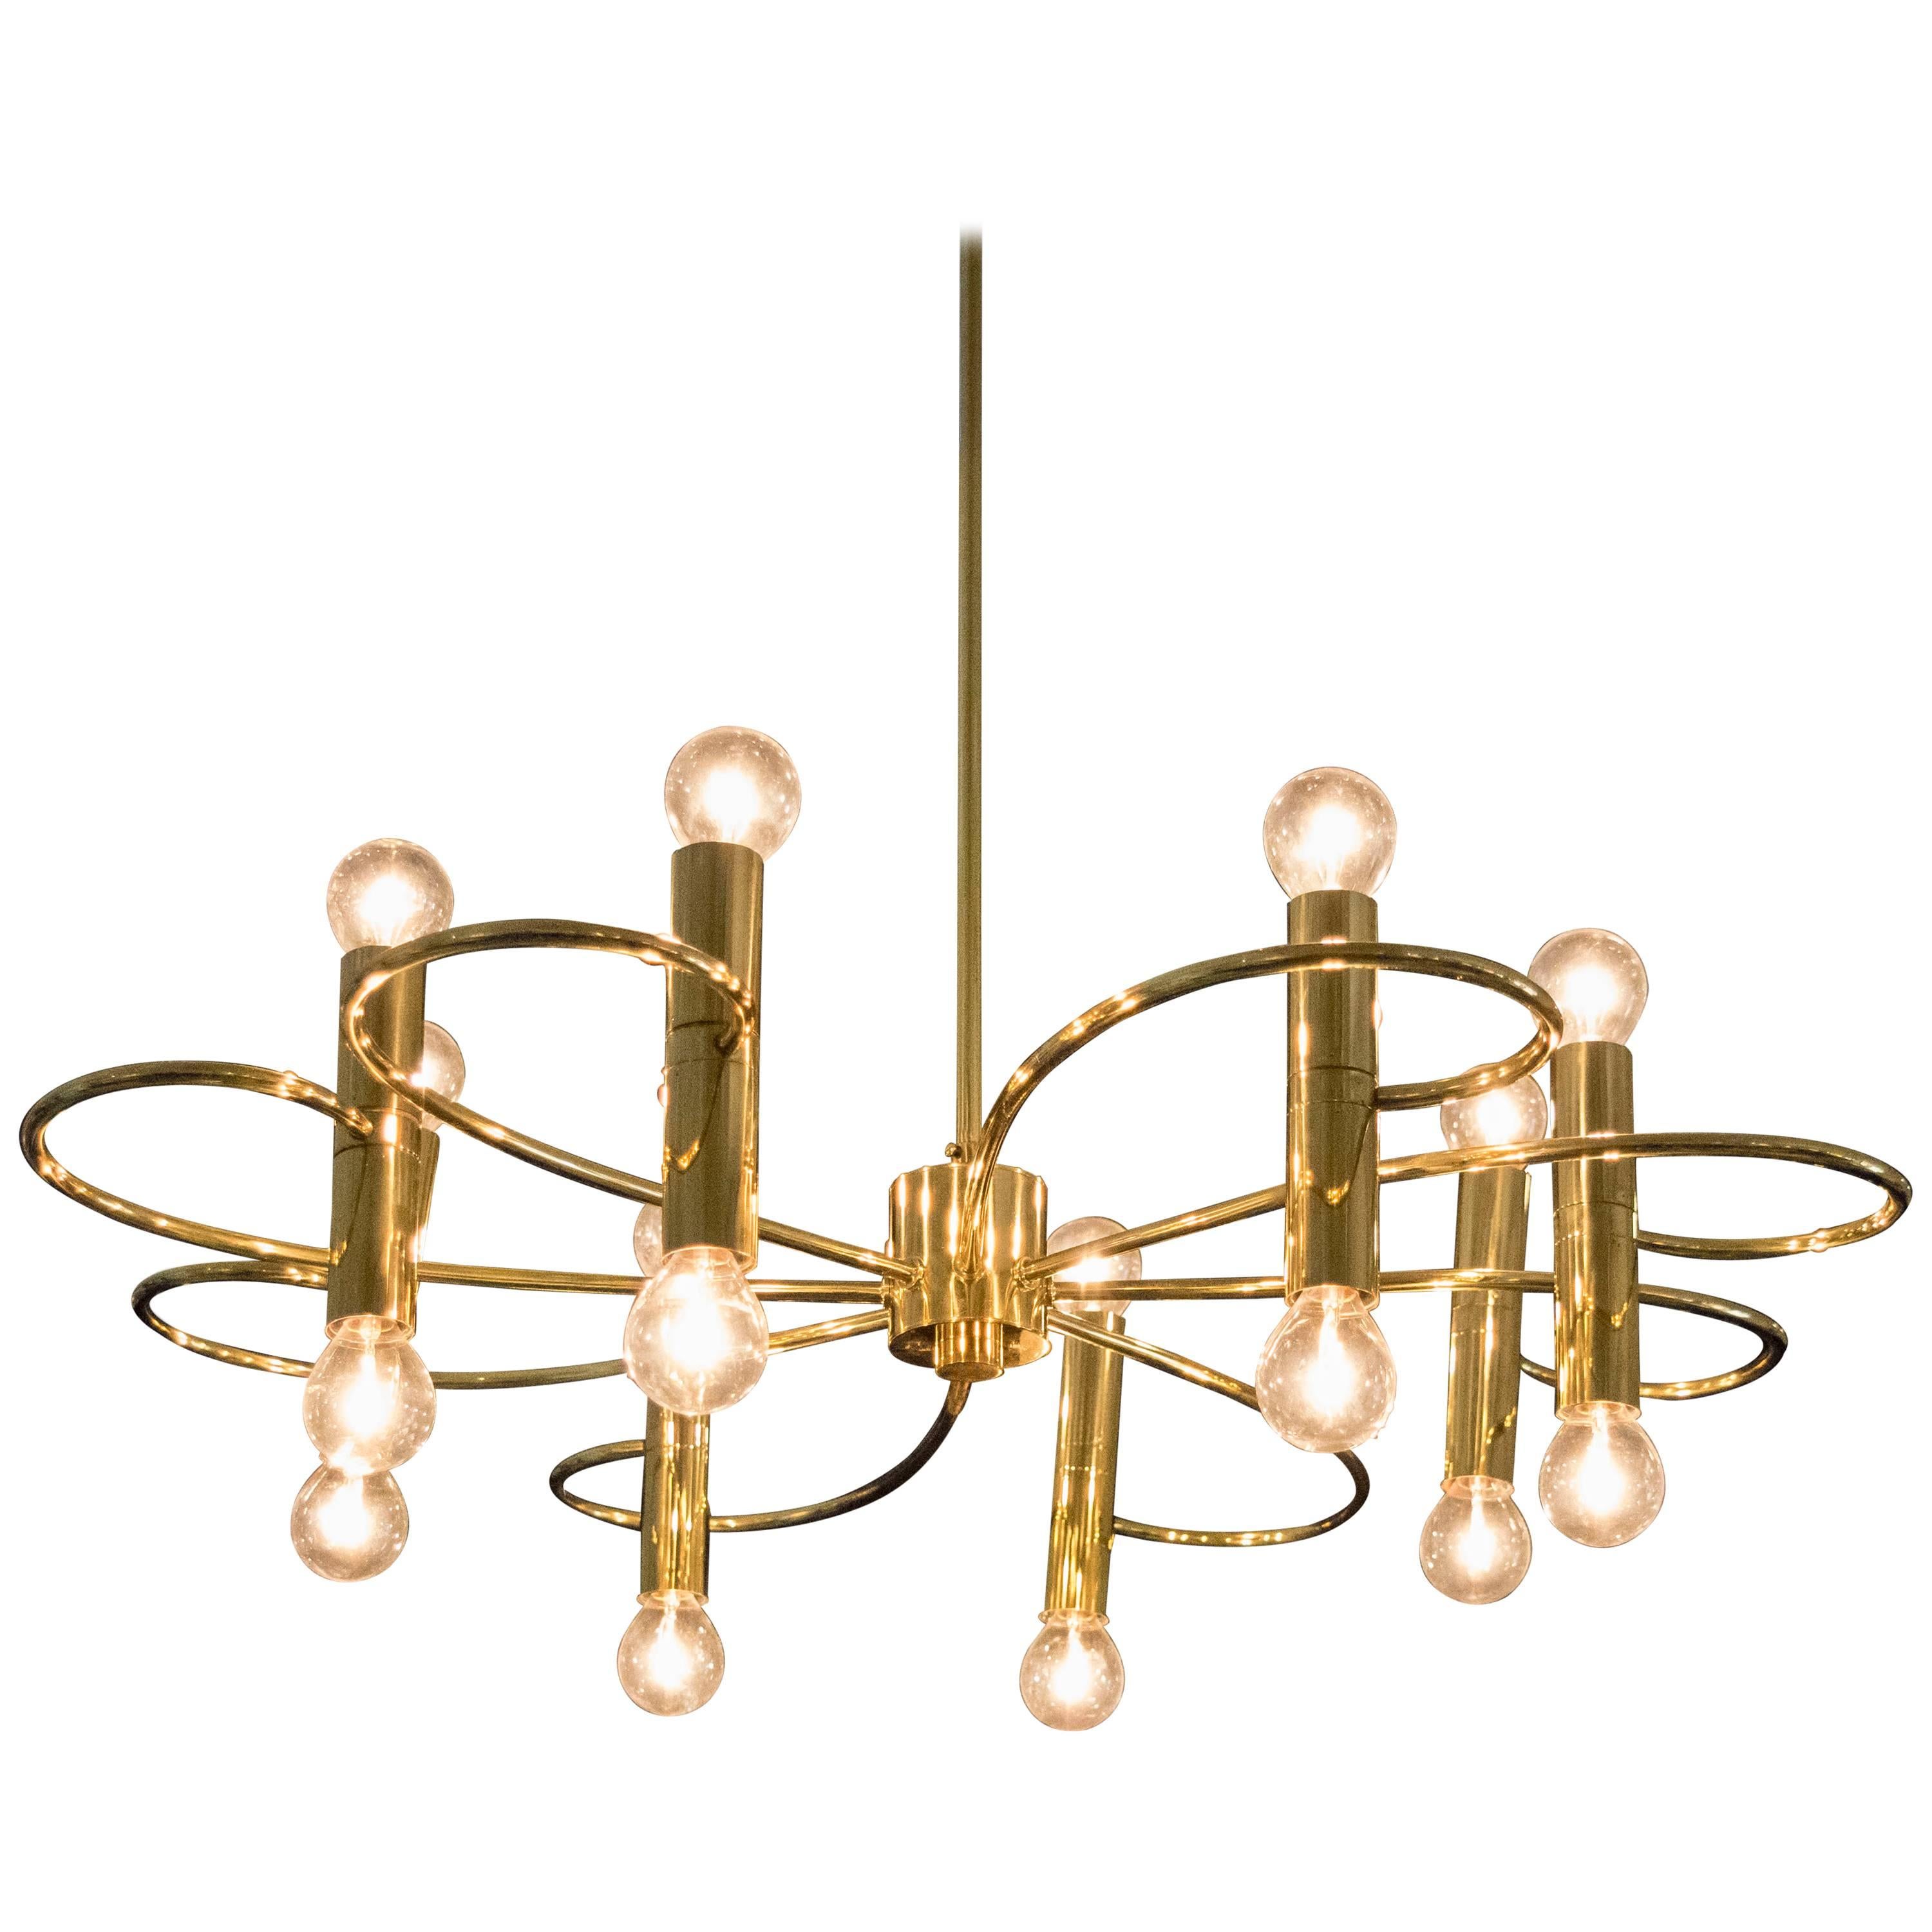 Sculptural Sciolari sixteen-light chandelier with graceful brass curved detailing newly restored and rewired.